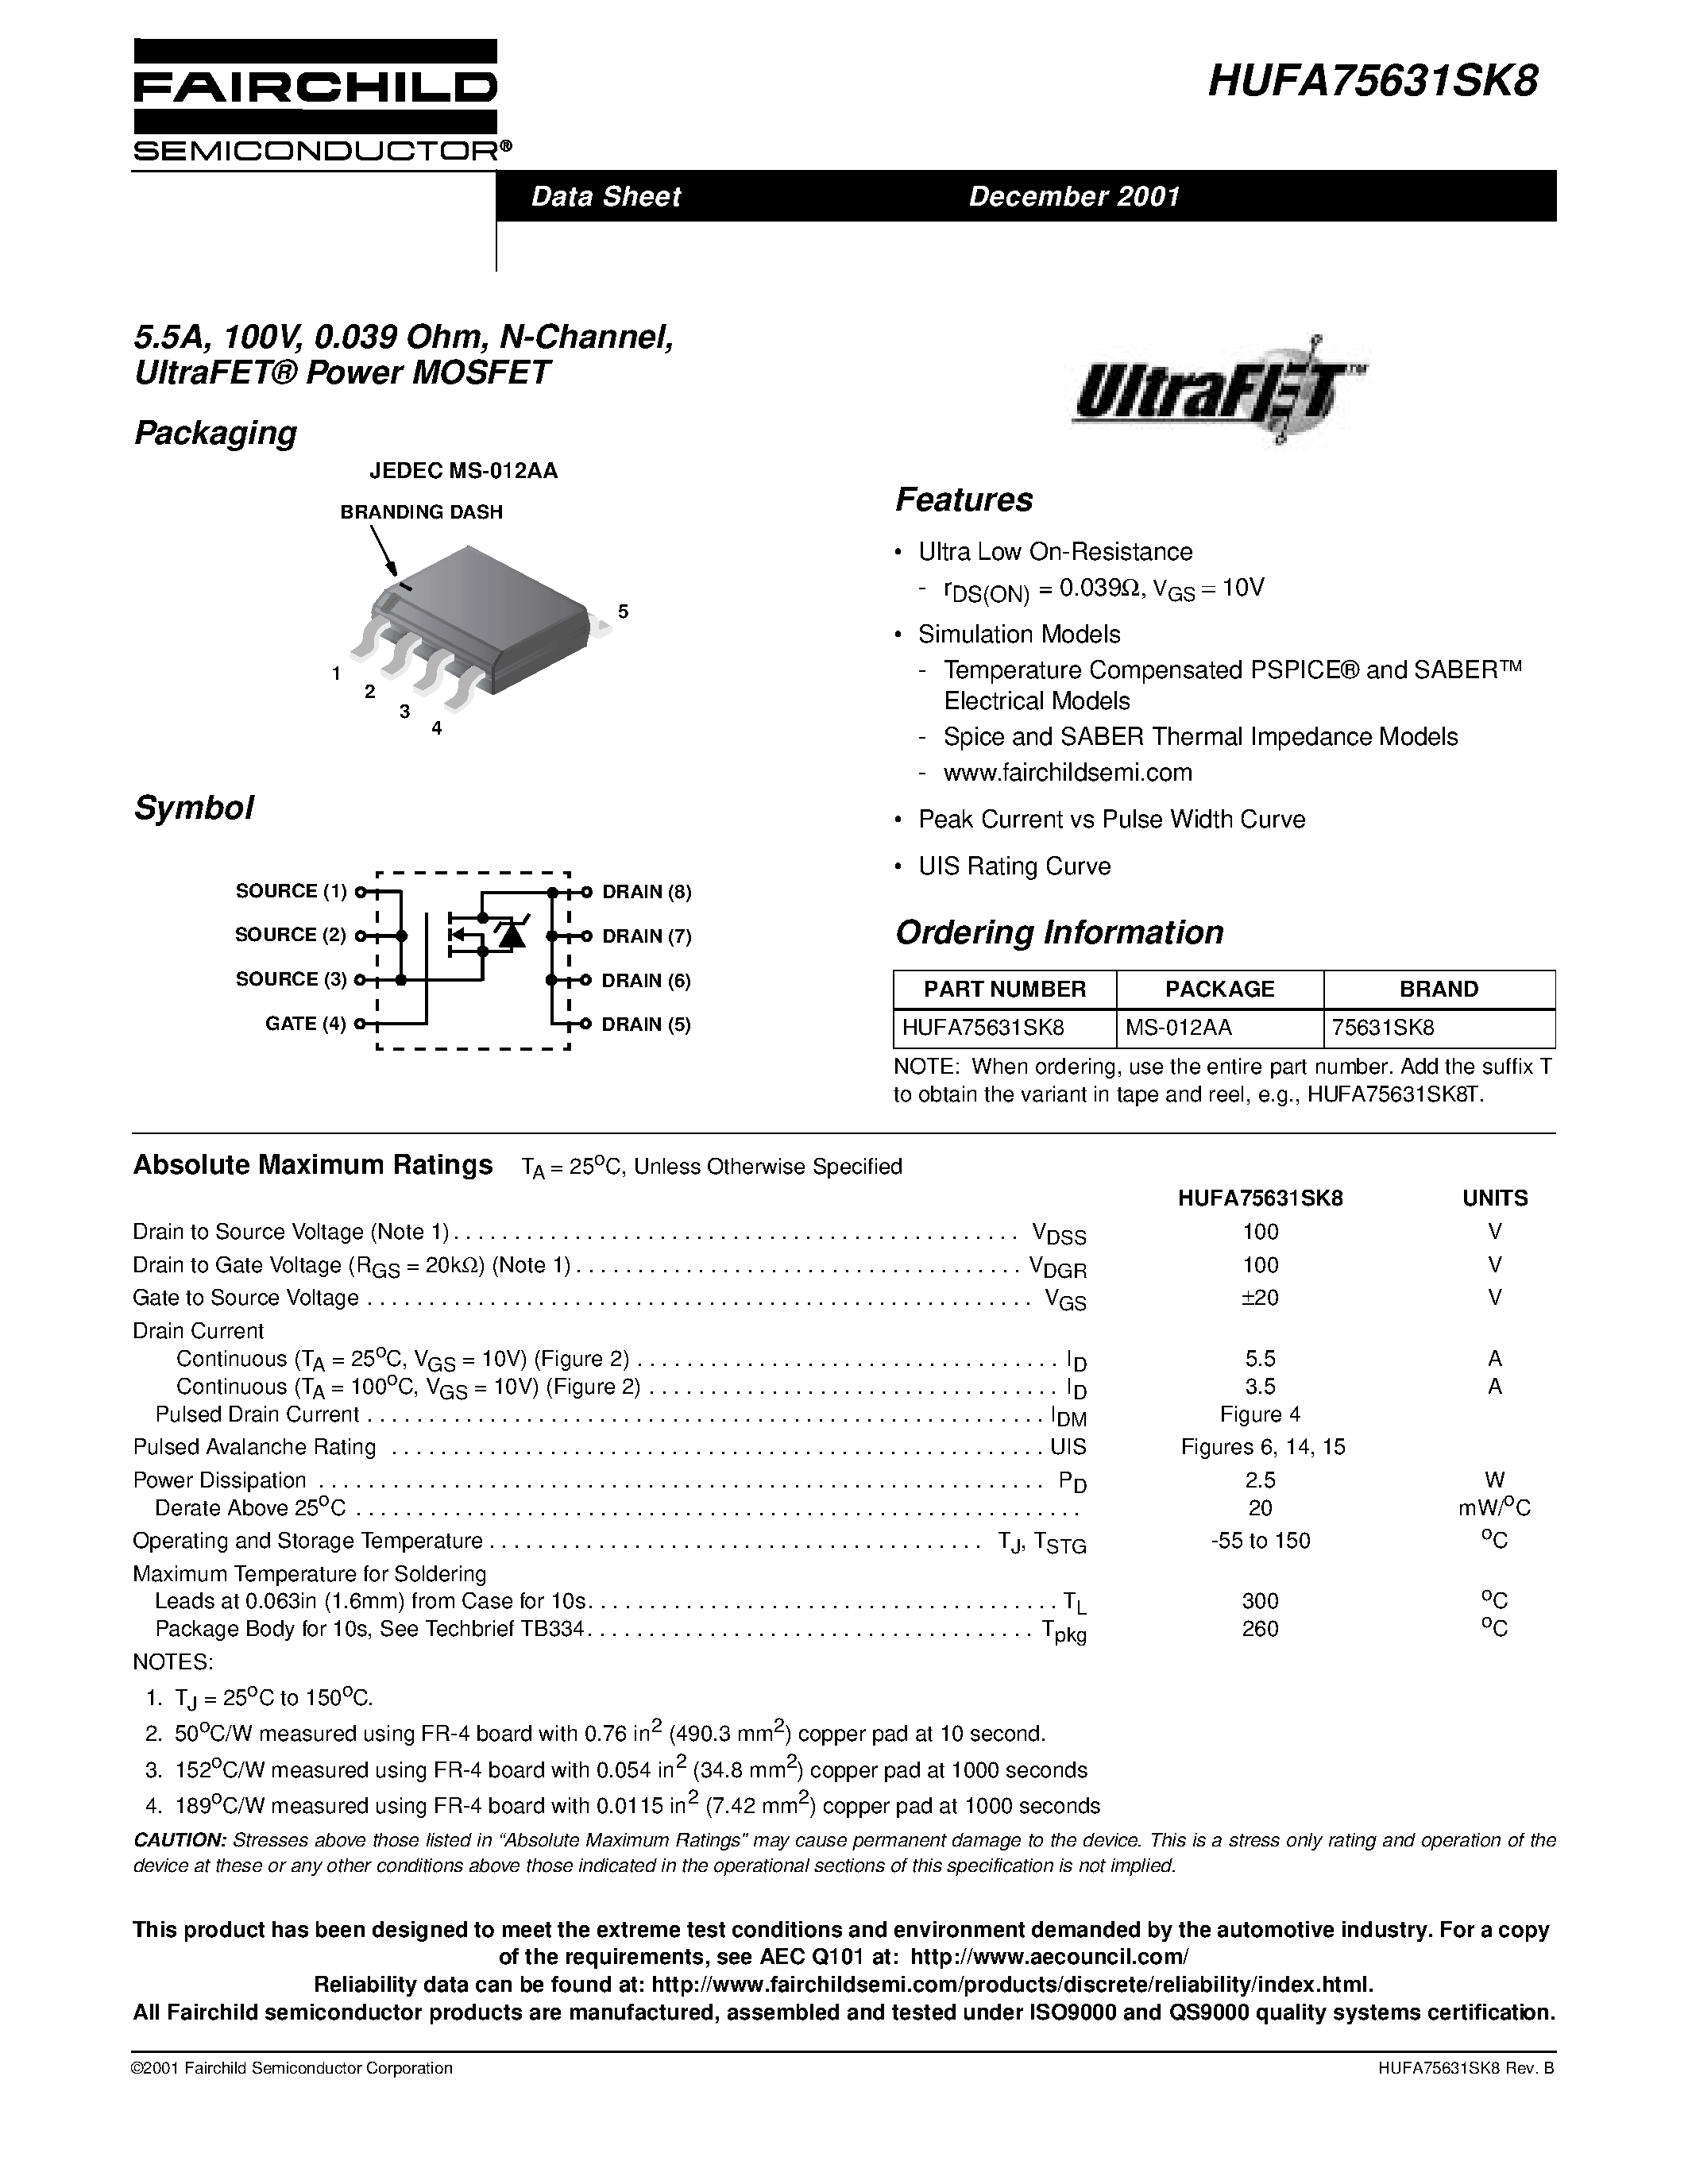 Datasheet HUFA75631SK8 - 5.5A/ 100V/ 0.039 Ohm/ N-Channel/ UltraFET Power MOSFET page 1